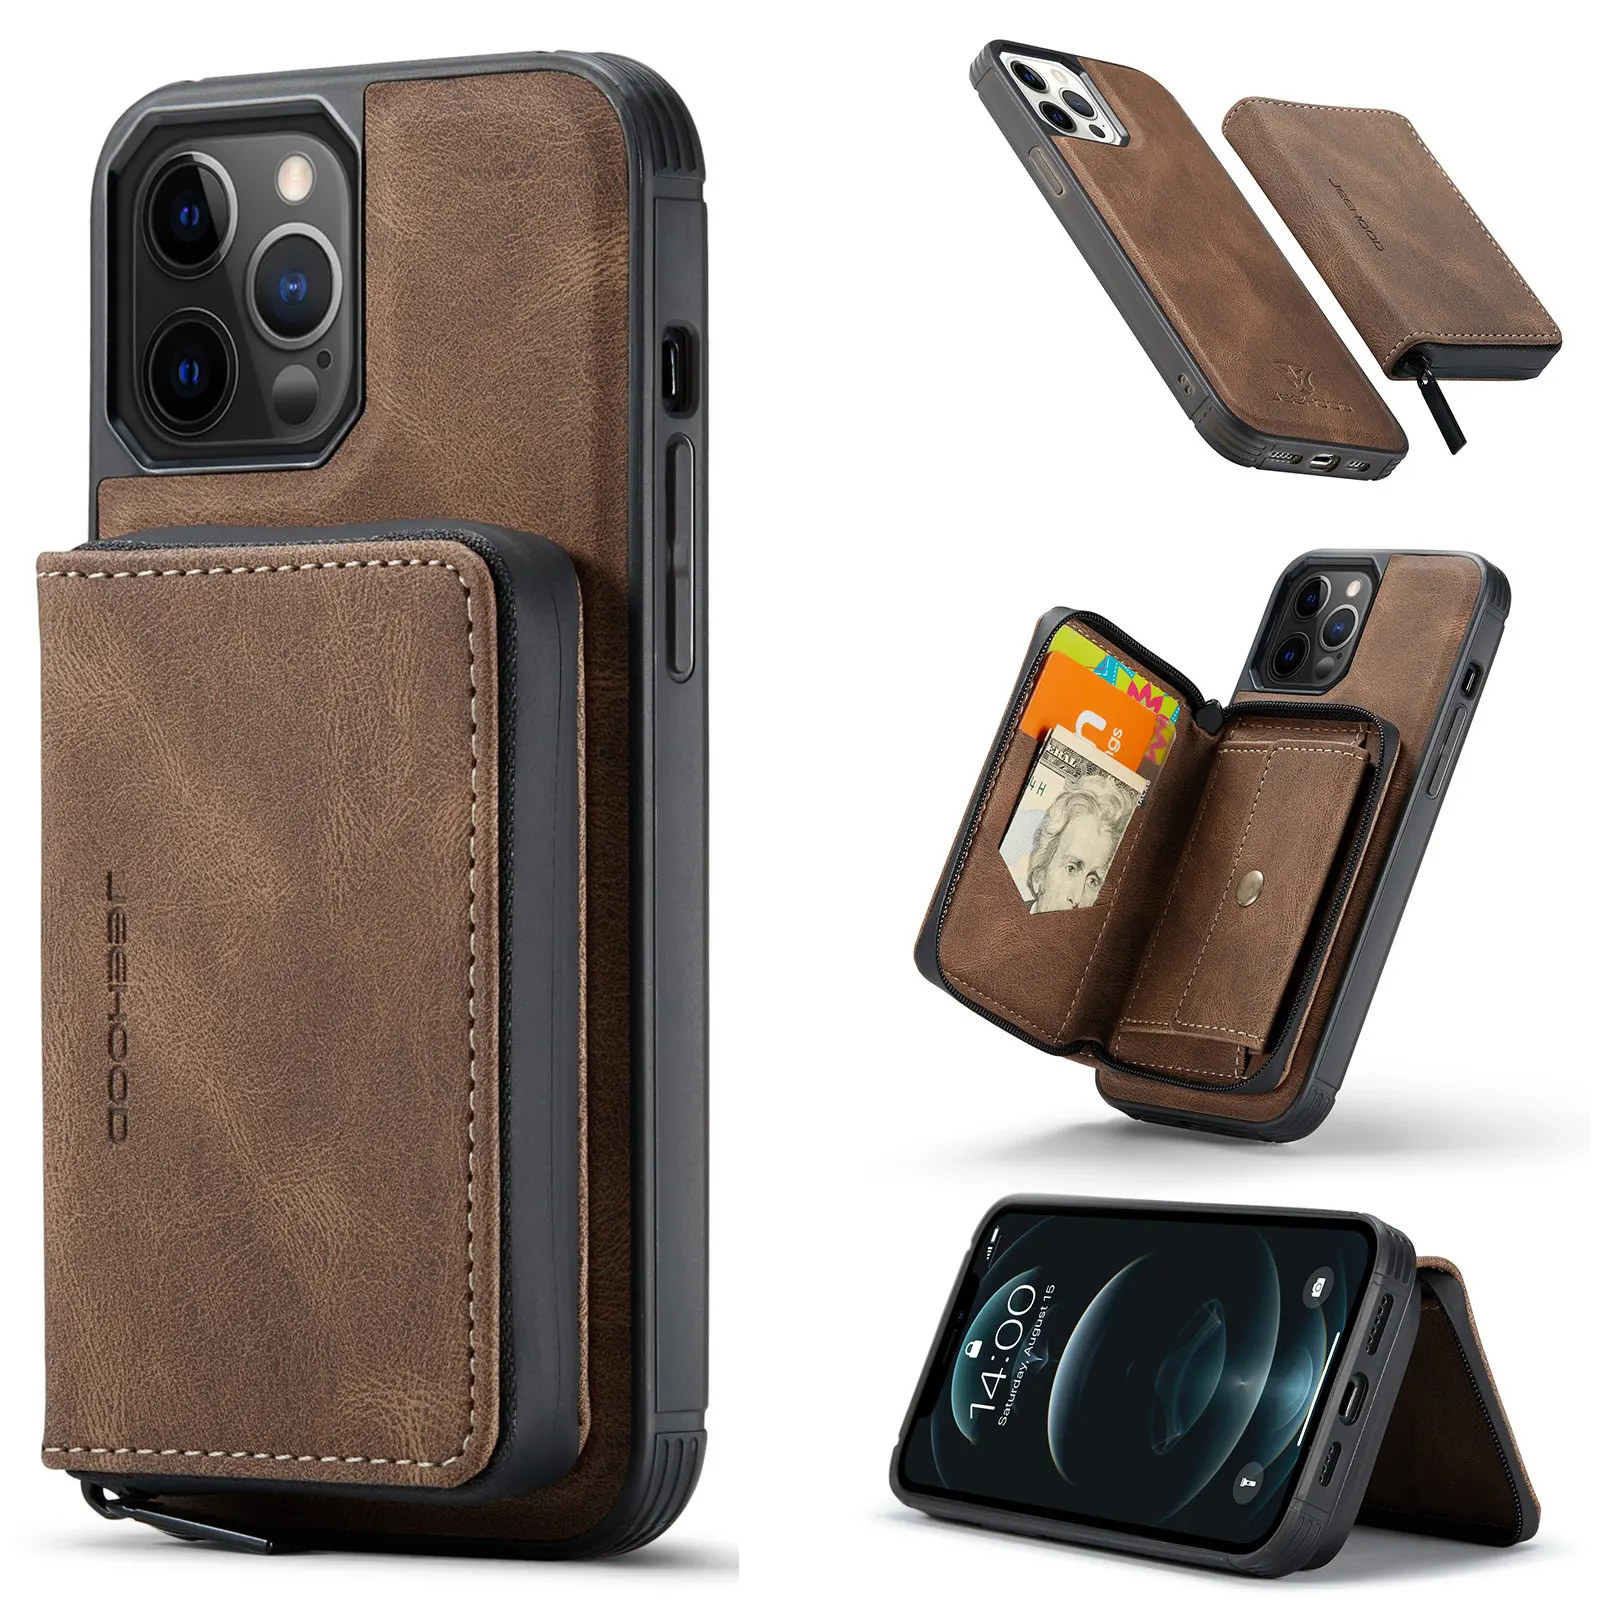 PU Leather Wallet Case For iPhone 13 12 11 Pro XS Max 8 7 Plus XR SE 2020 Case Card Solt Bag Magnetic Support Wireless Charging